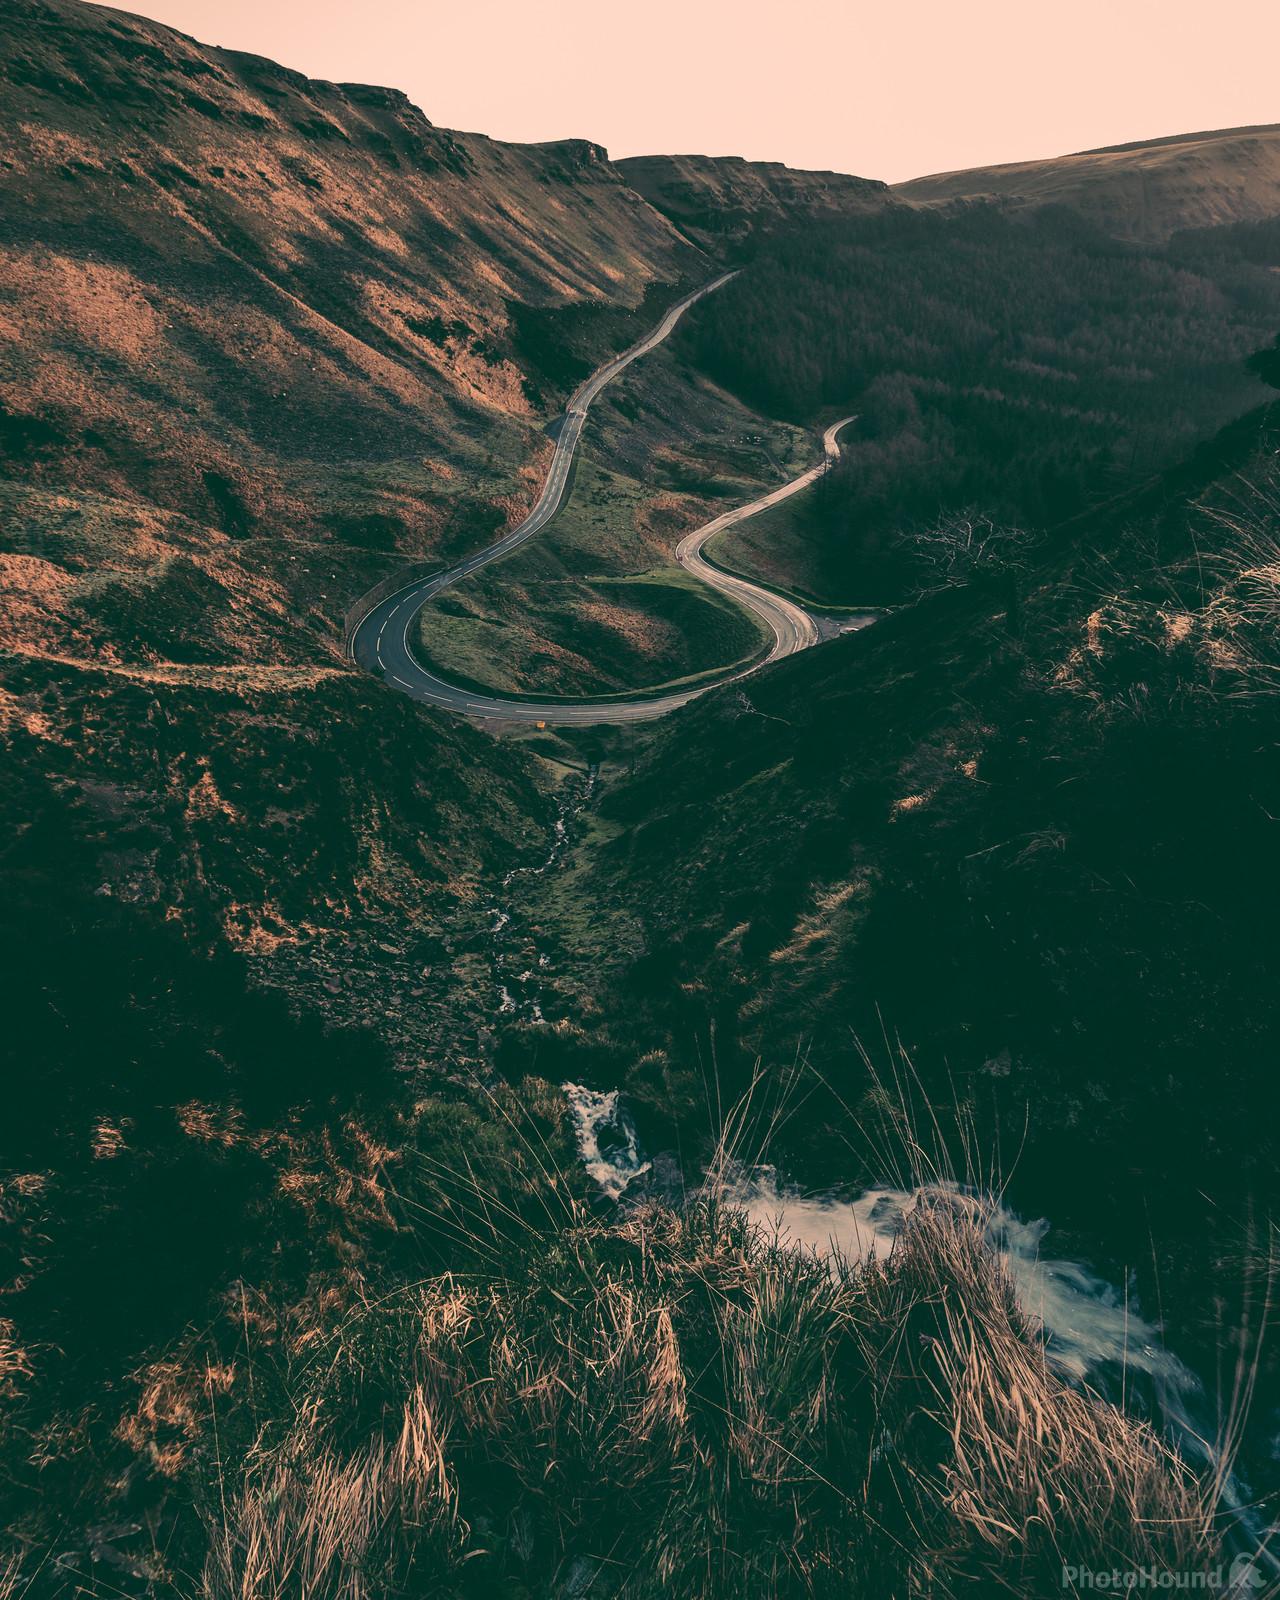 Image of Bwlch Hairpin by Daniel Phillips